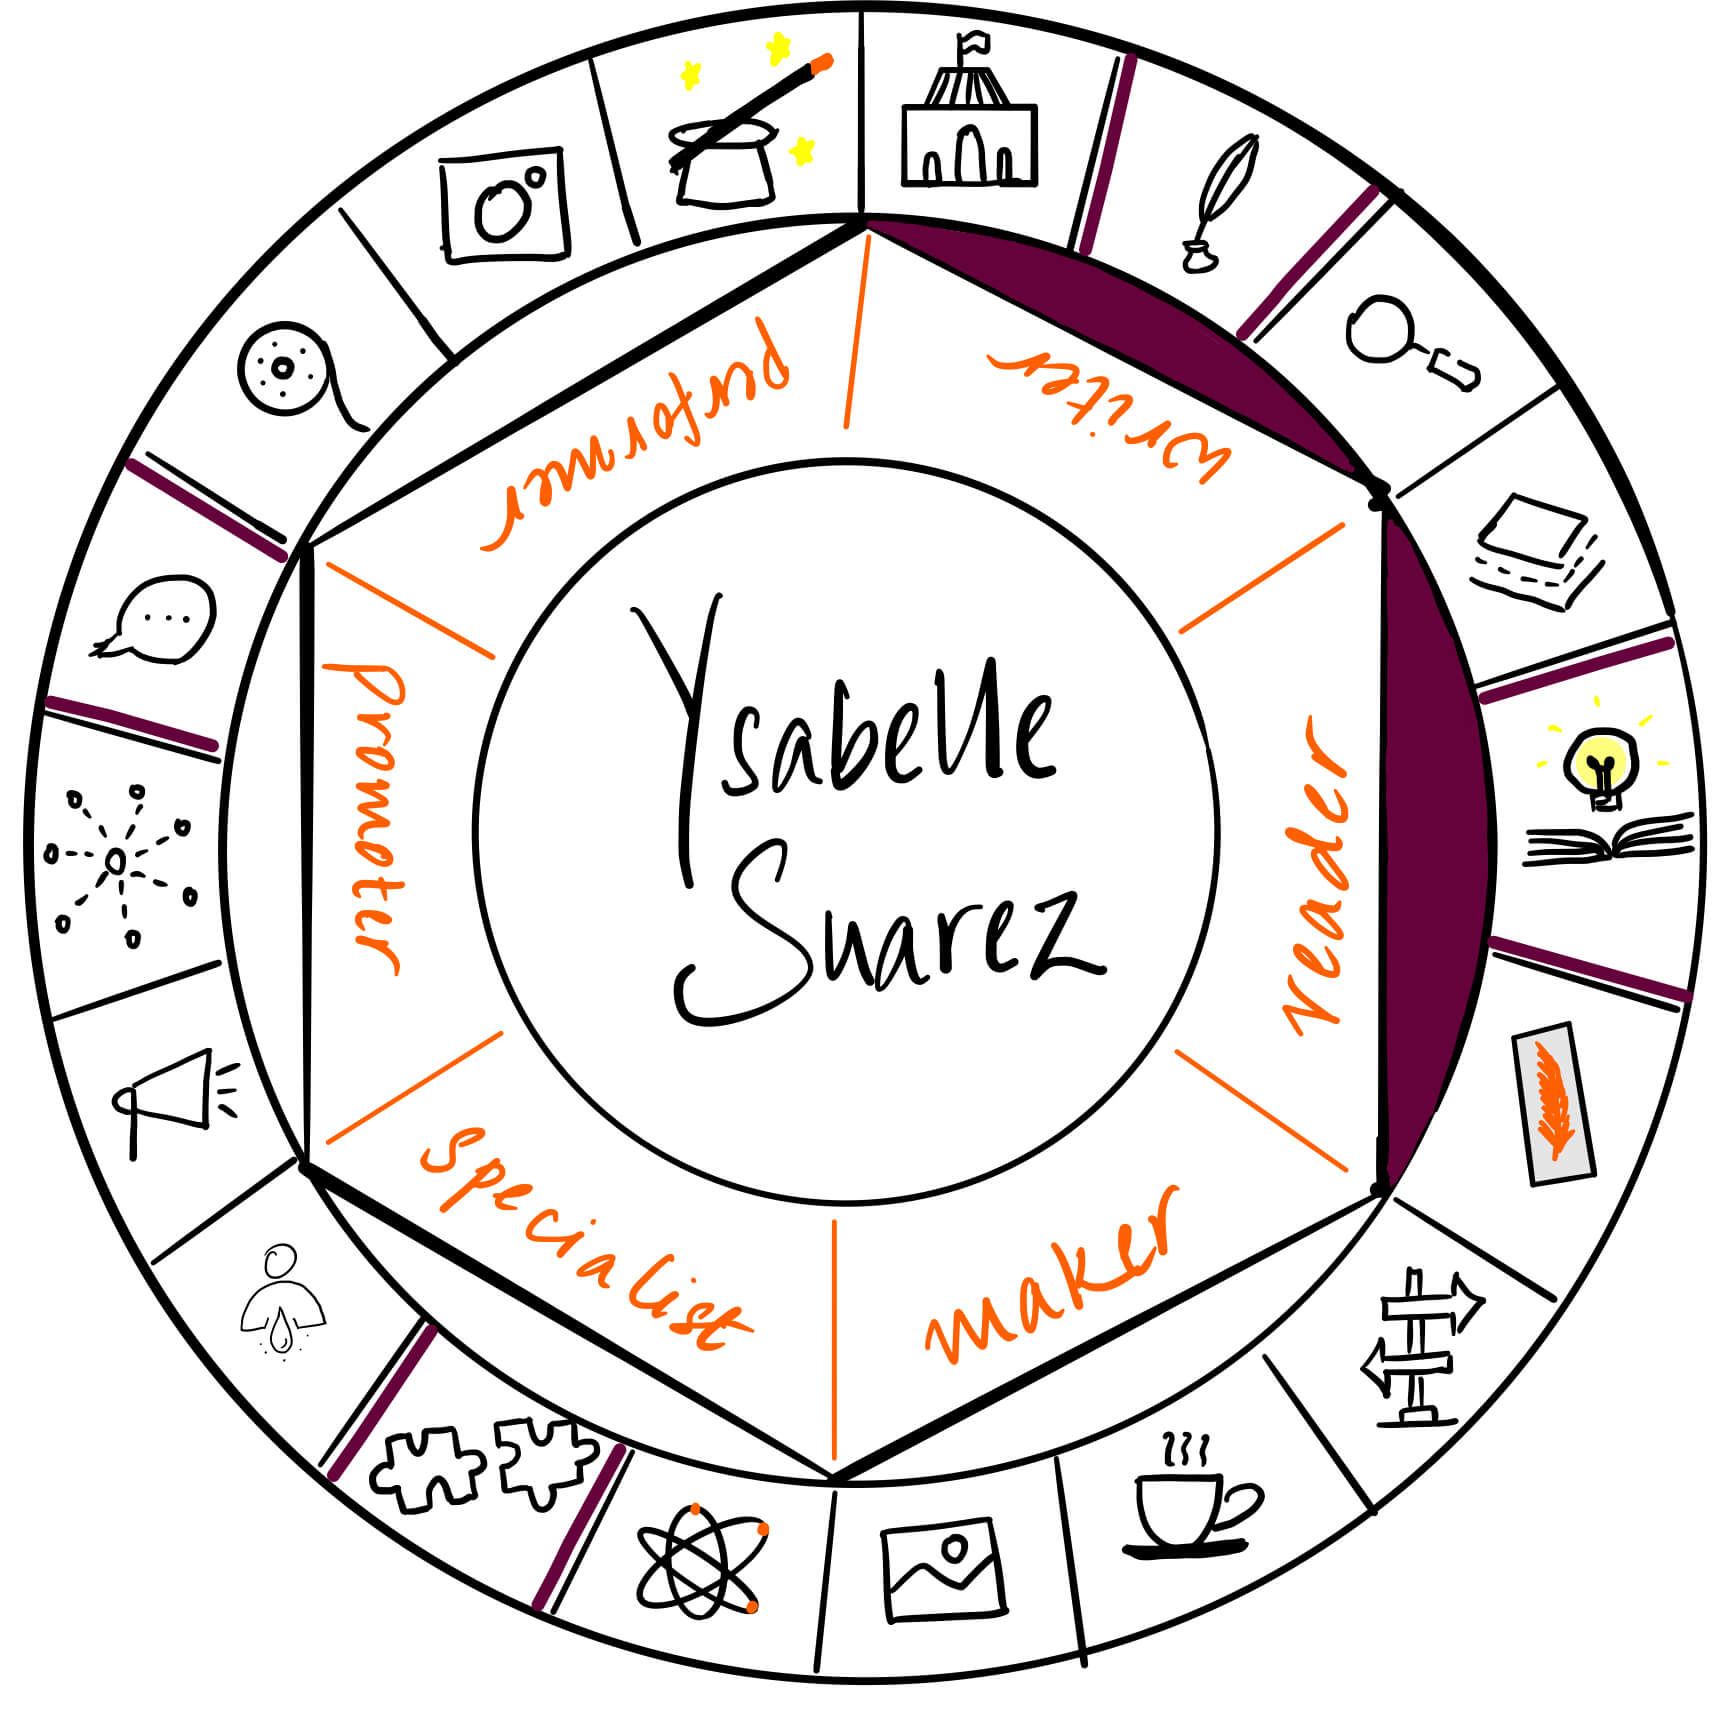 Ysabelle Suarez is a reader and writer. It's a pleasure to have her over on The Creator's Roulette to talk about Diversity in Fiction and Publishing.